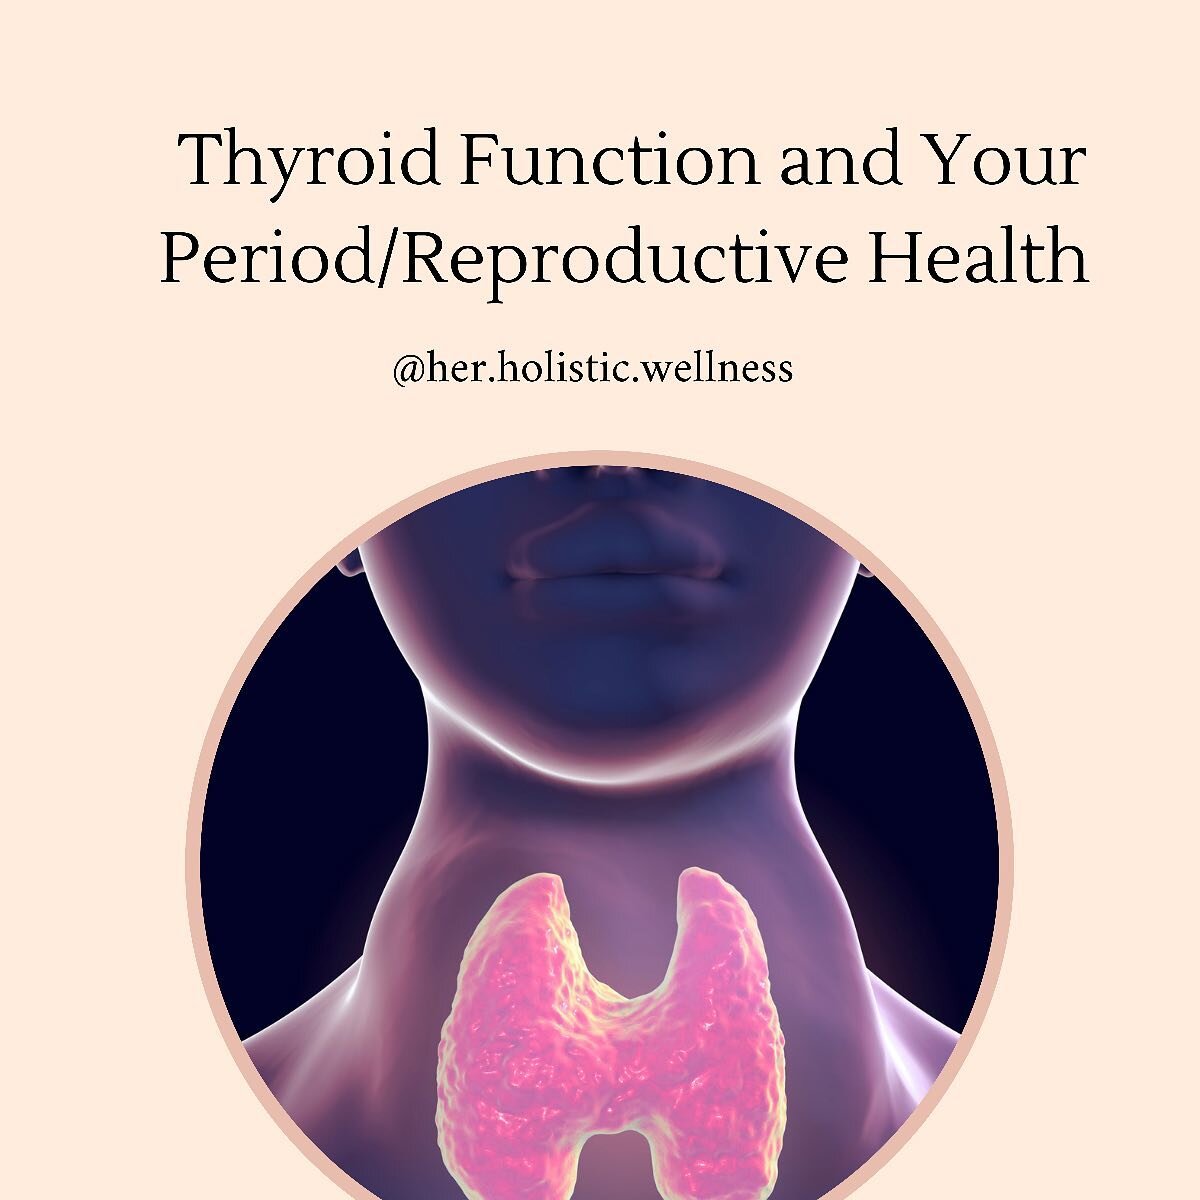 [Swipe]. Our thyroid may be little (its a small gland that sits low on the front of the neck) but it&rsquo;s mighty. ⁣
⁣
It controls all the metabolic processes in our body and has a major impact on our reproductive health.⁣
⁣
Swipe to find out how i